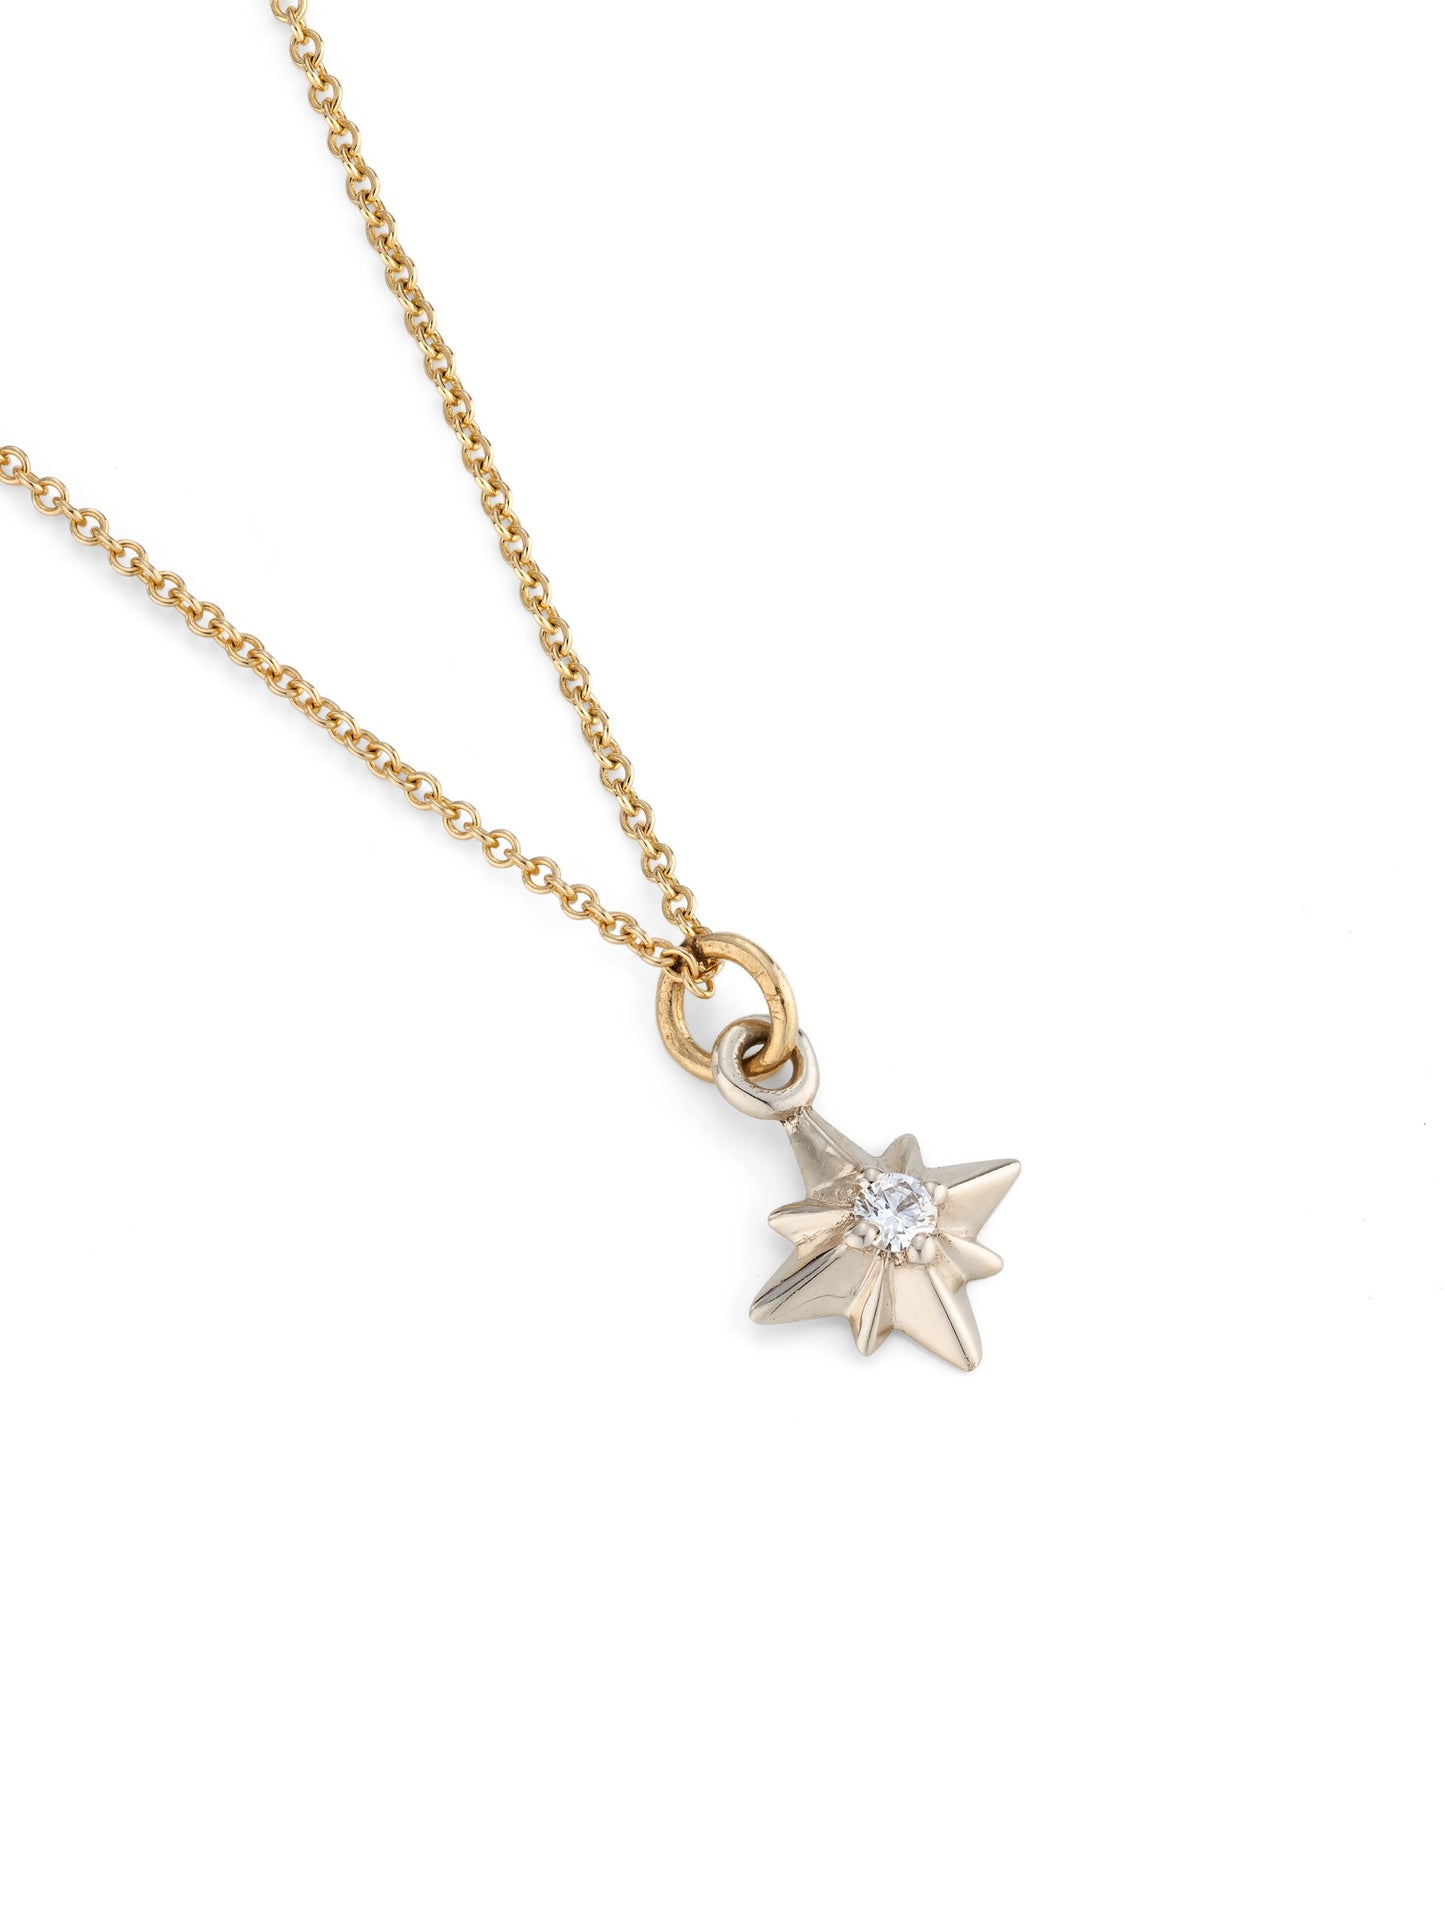 White Gold and Diamond Pointed Star Necklace Pendant